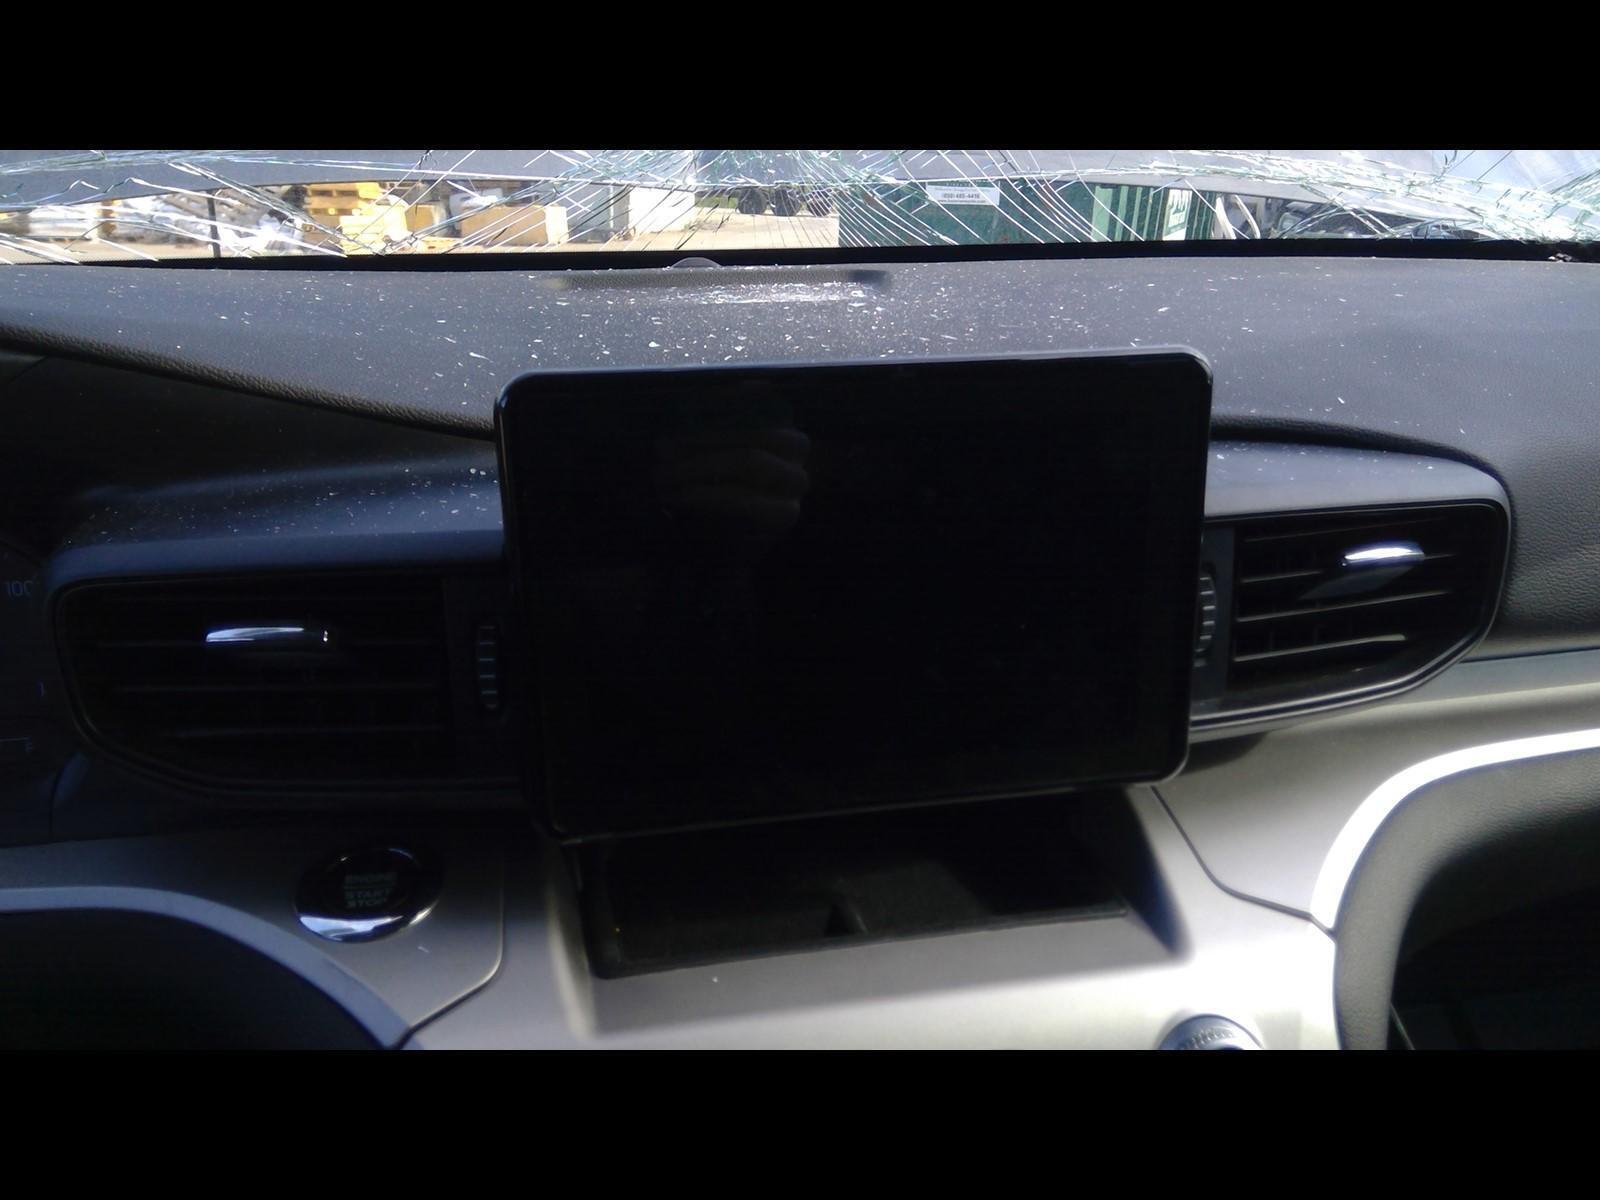 Used Front Center Infotainment Display fits: 2021 Ford Explorer front display ce